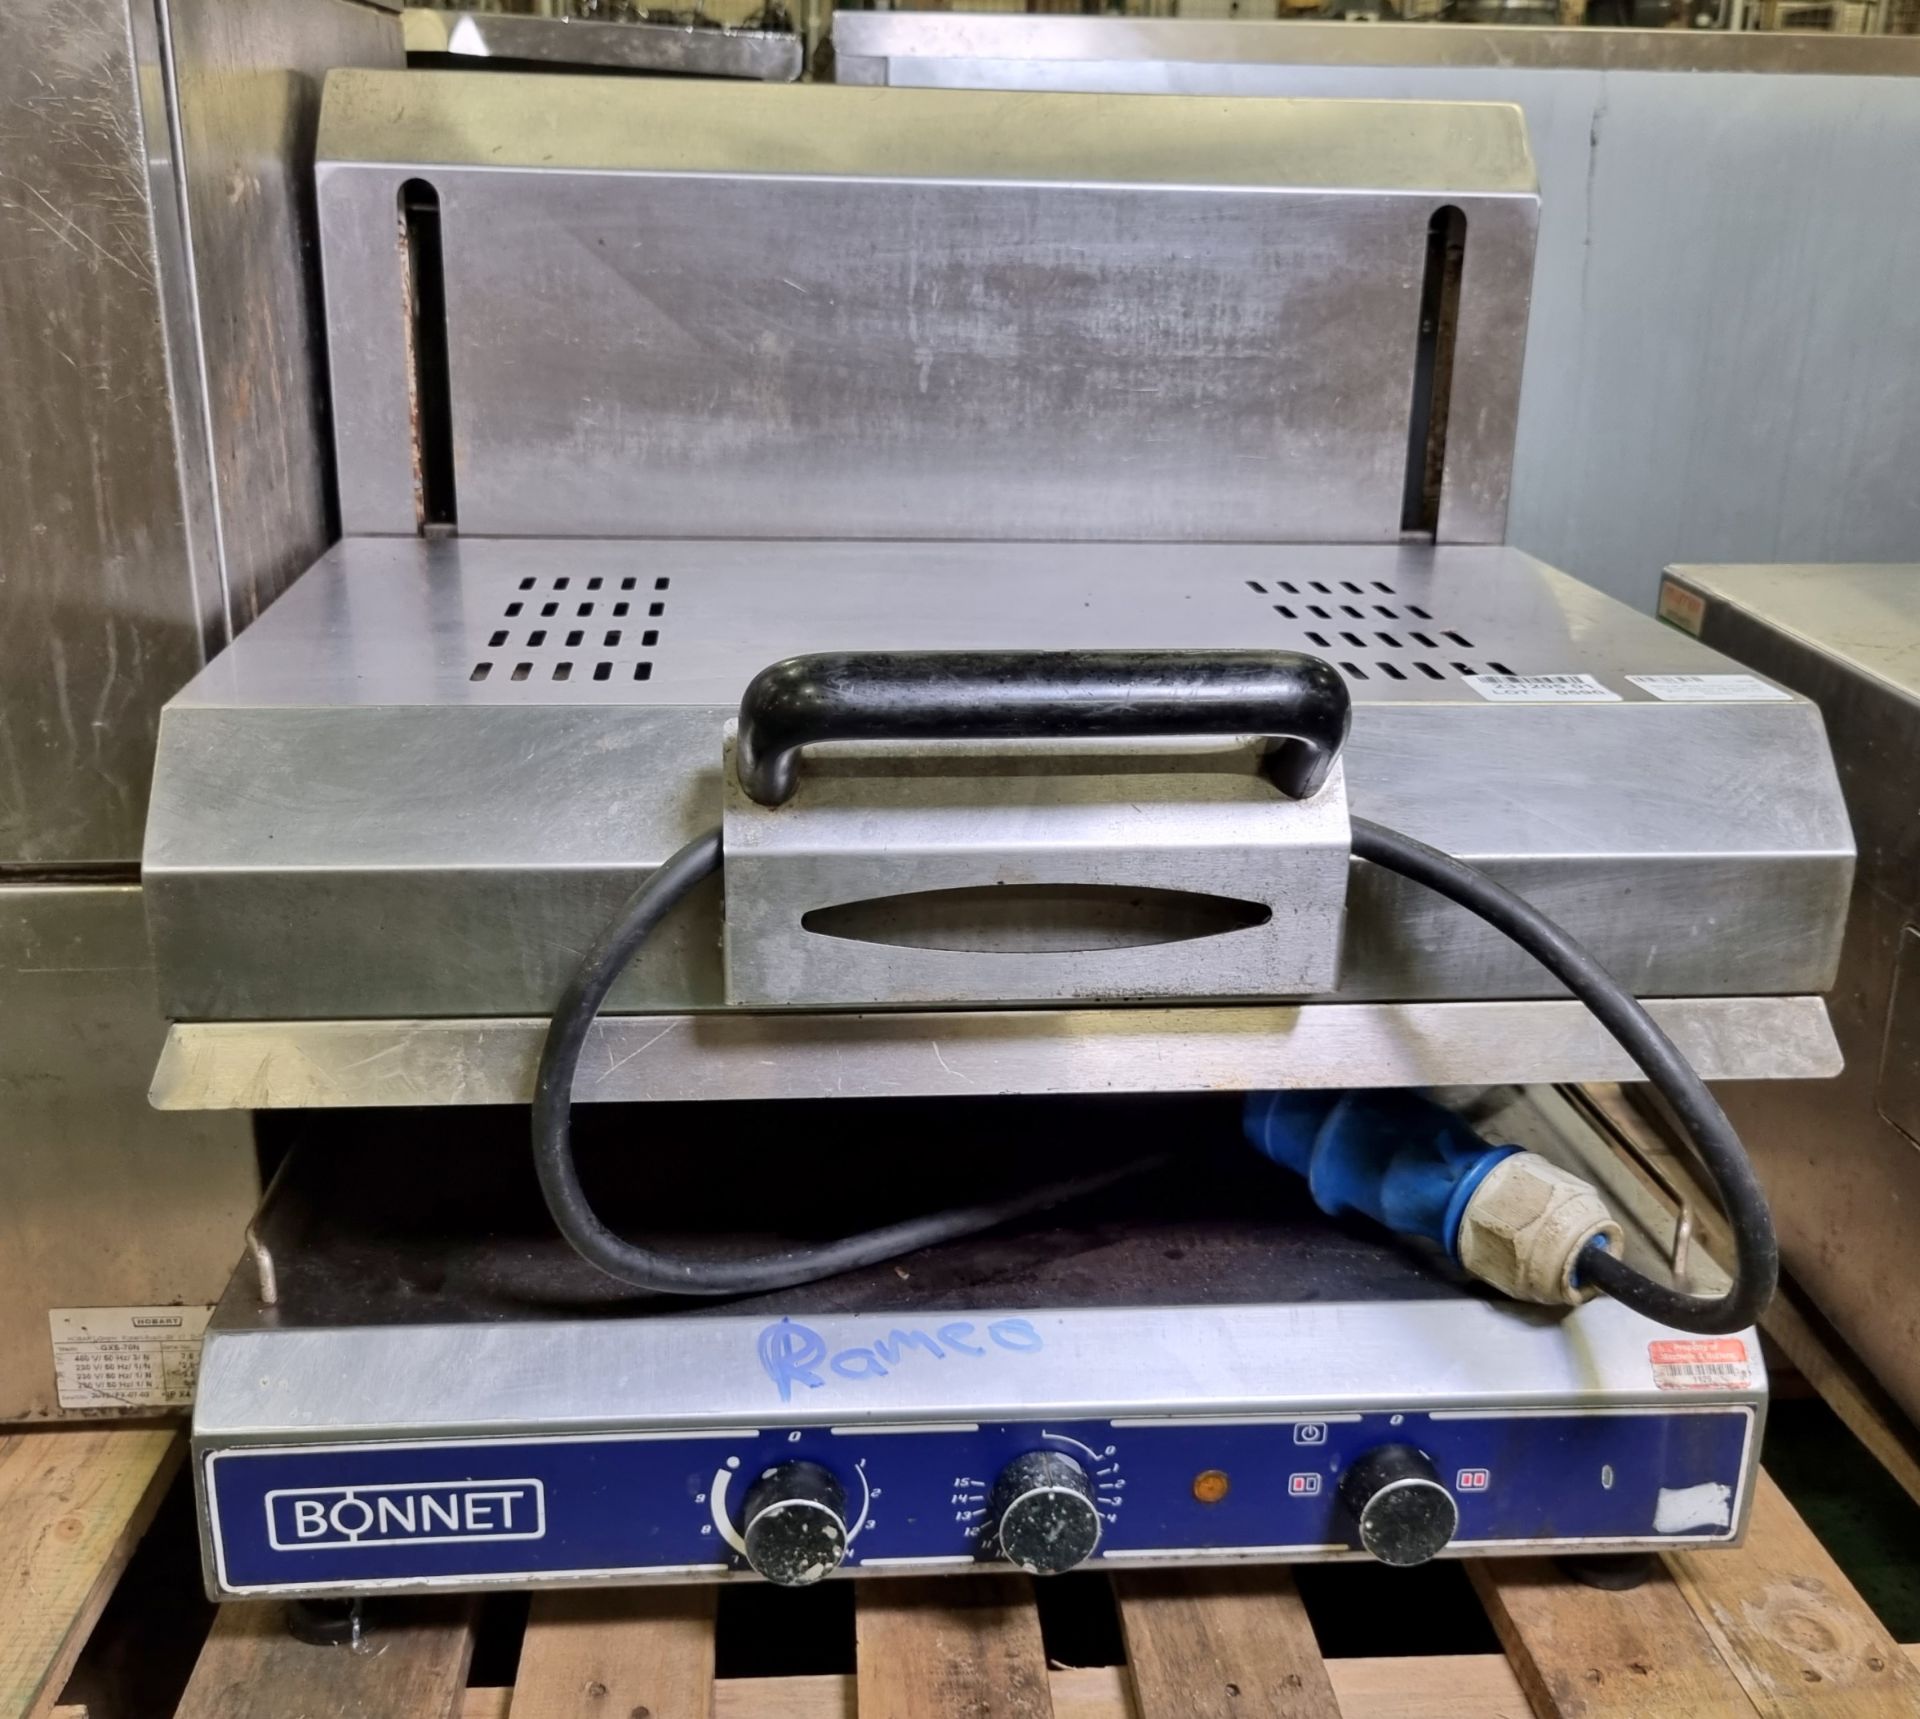 Bonnet SEM 5000 VCT rise and fall electric salamander grill - W 600 x D 650 x H 600mm - Image 3 of 3